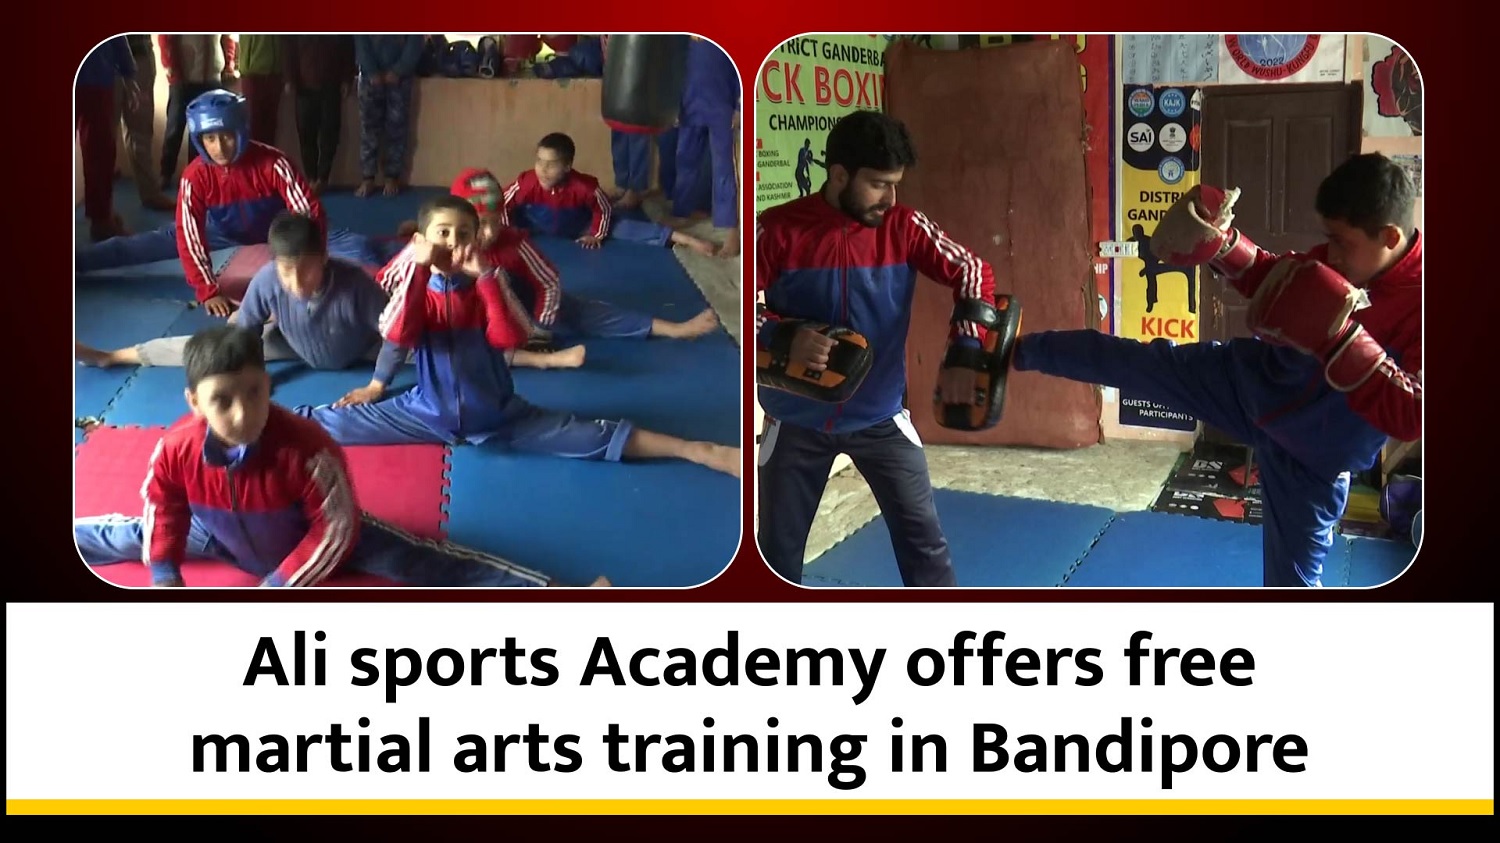 Ali sports Academy offers free martial arts training in Bandipore